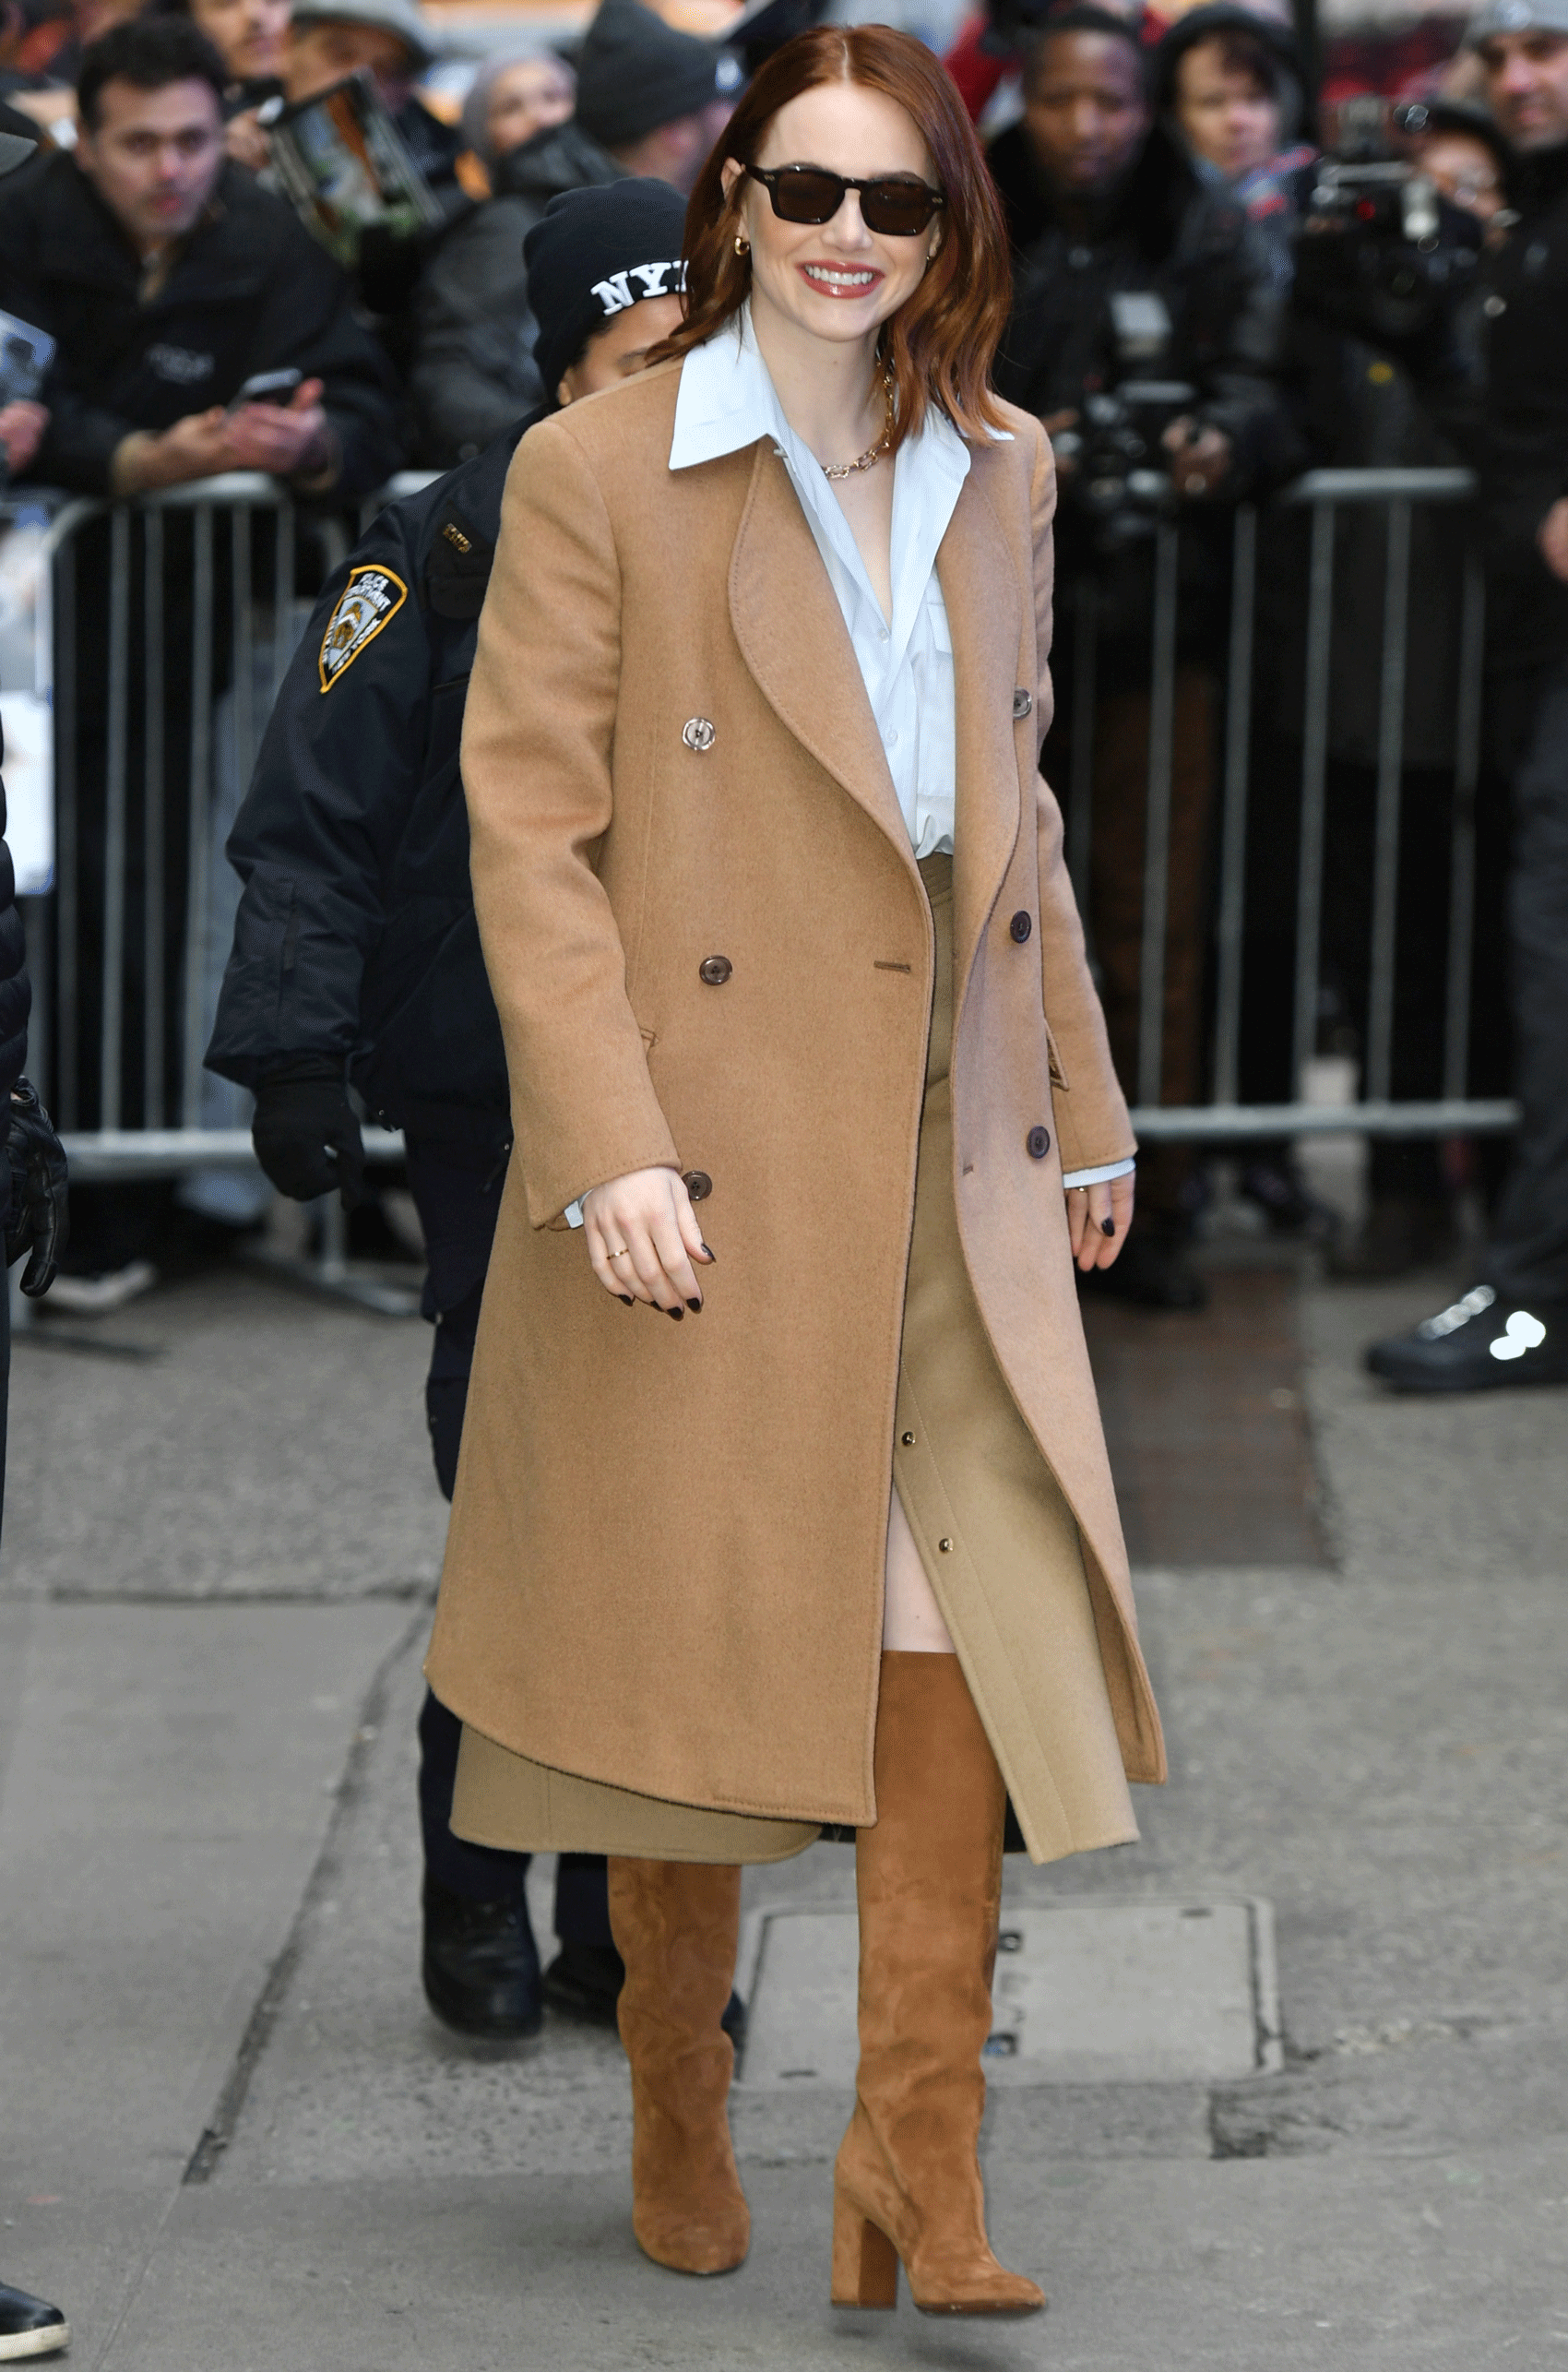 emma stone wearing a tan coat and suede boots by louis vuitton